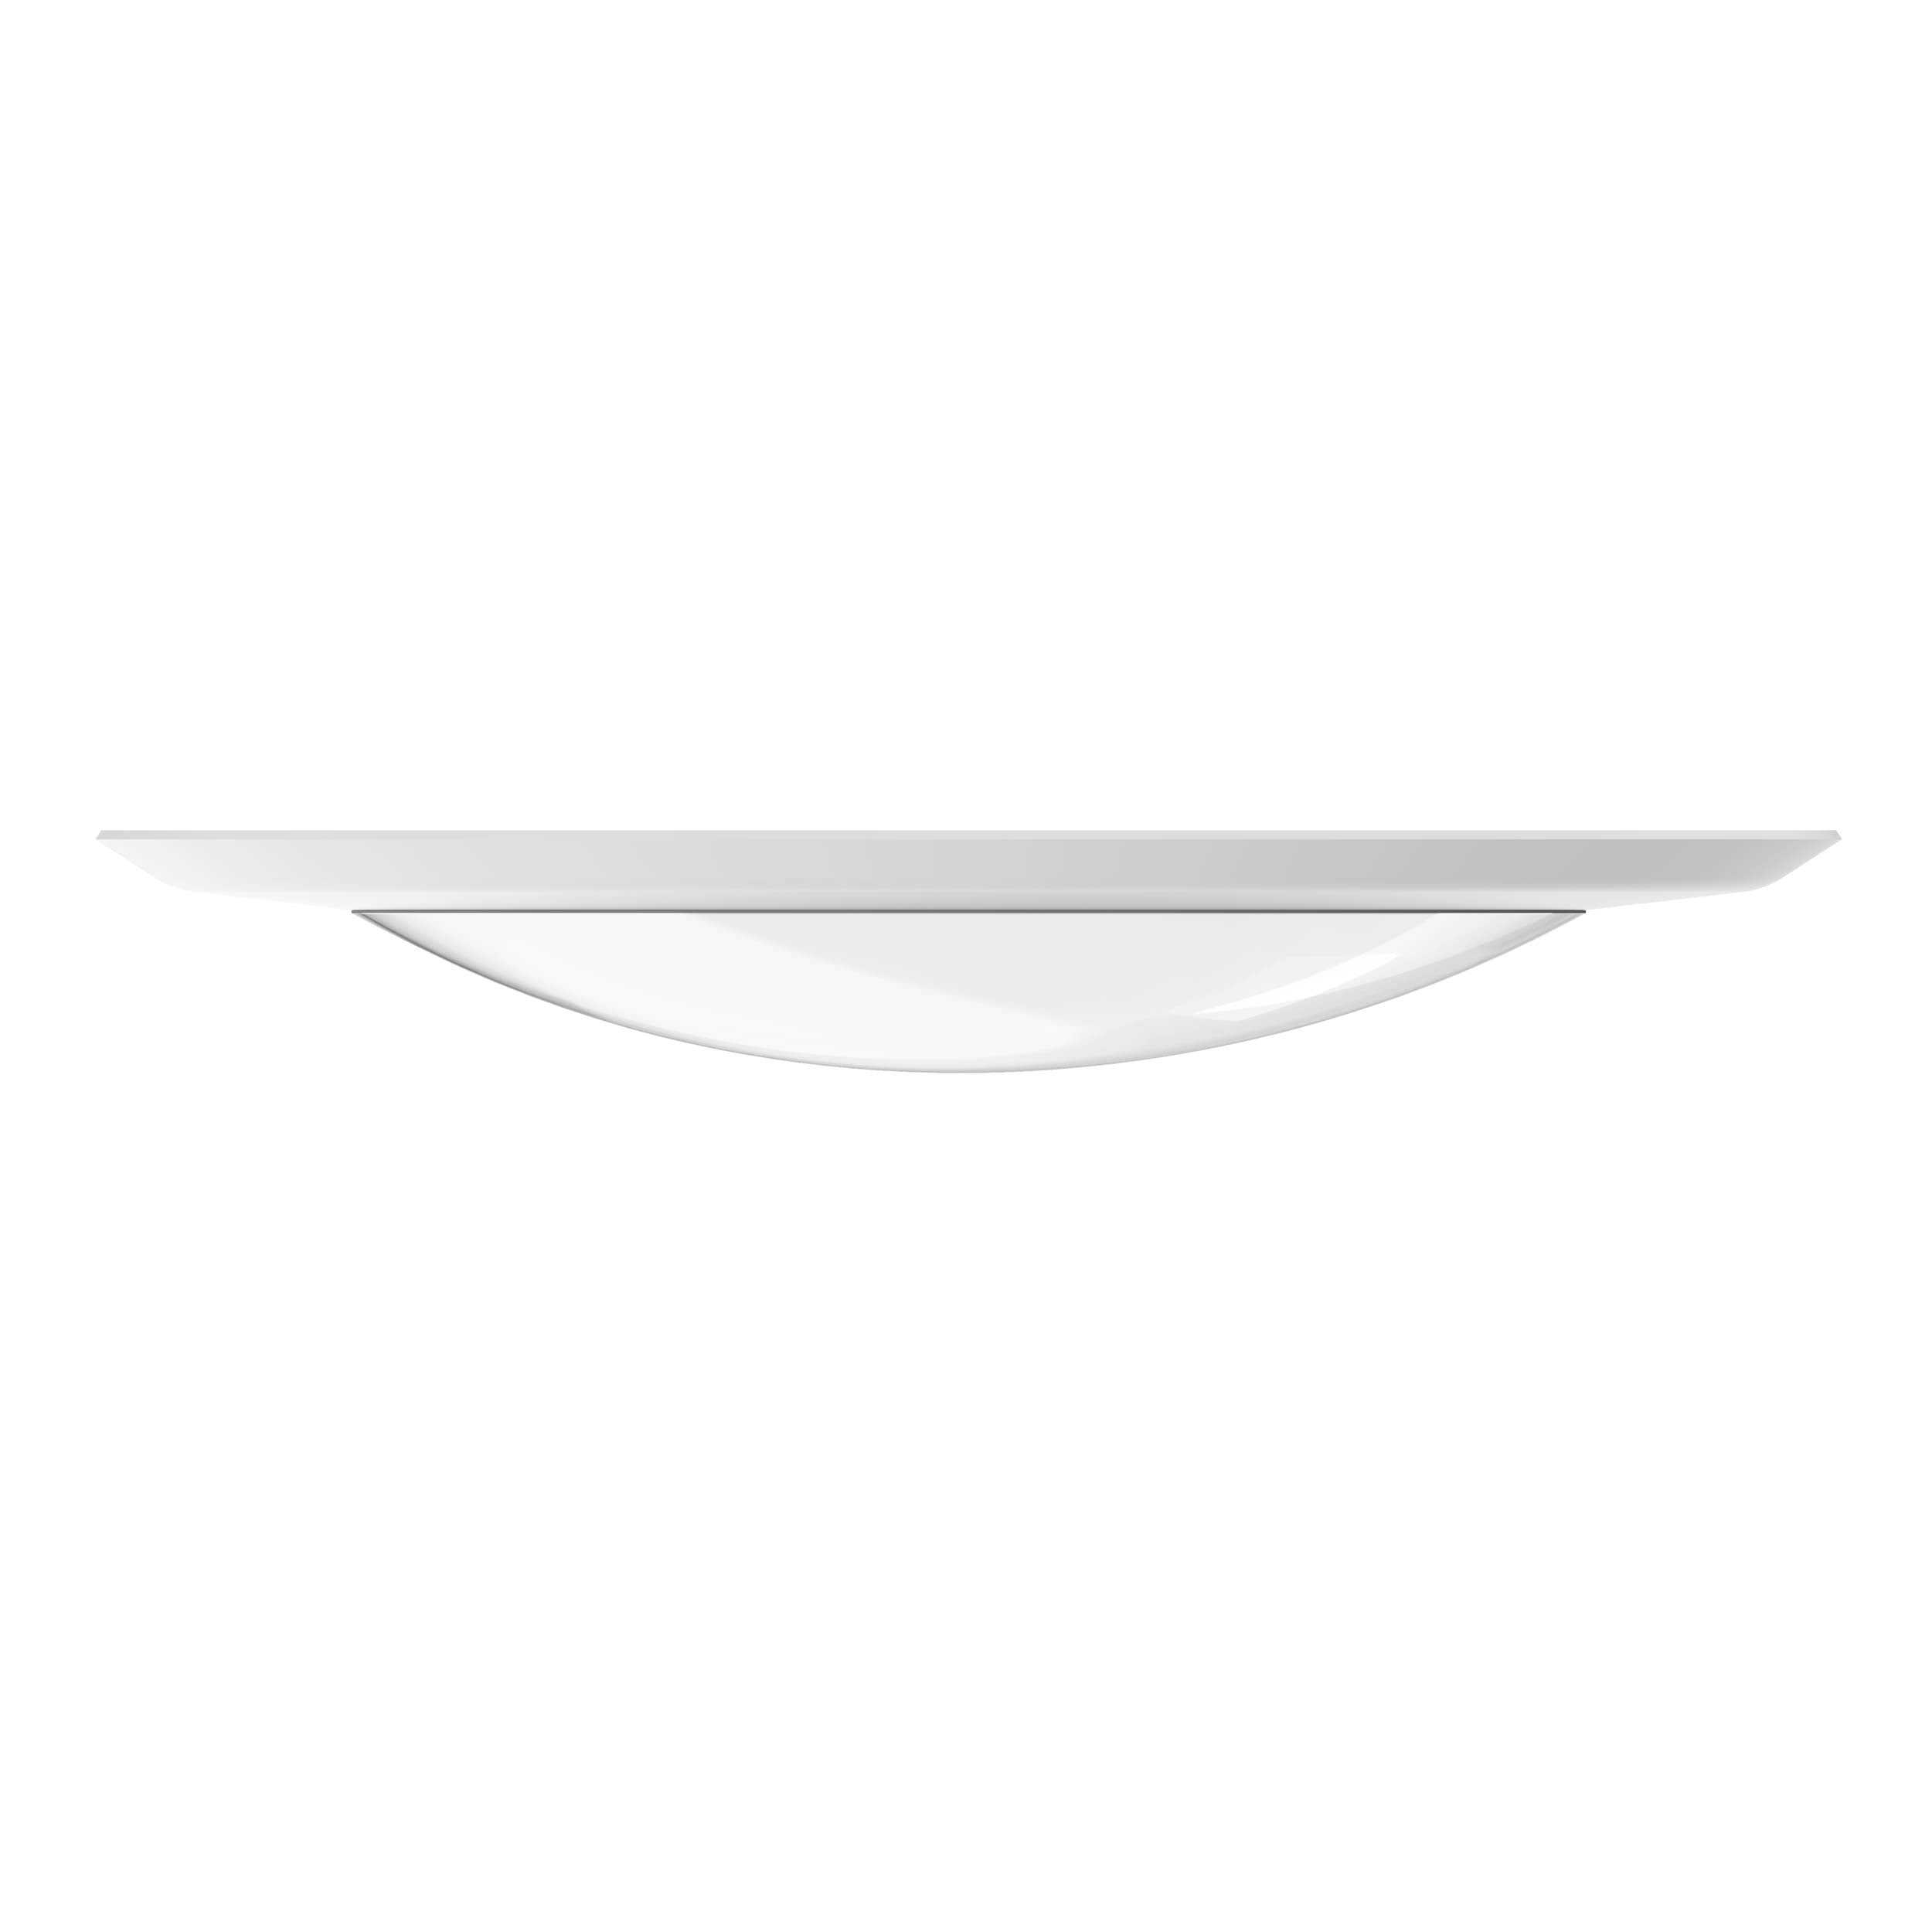 Seen on edge, this LED Disk Downlight has a dome lens and a low profile trim to create a streamlined look that blends into the ceiling. You can light a large area with its 90-degree beam angle. Quickly Install it either in a recessed can as a retrofit LED light or flush mount it to the ceiling when you pair it with a junction box. The j-box method means your light can fit in narrow crawl spaces where a tall recessed can won’t fit. This is a high CRI 90+ light fixture with true color rendering.